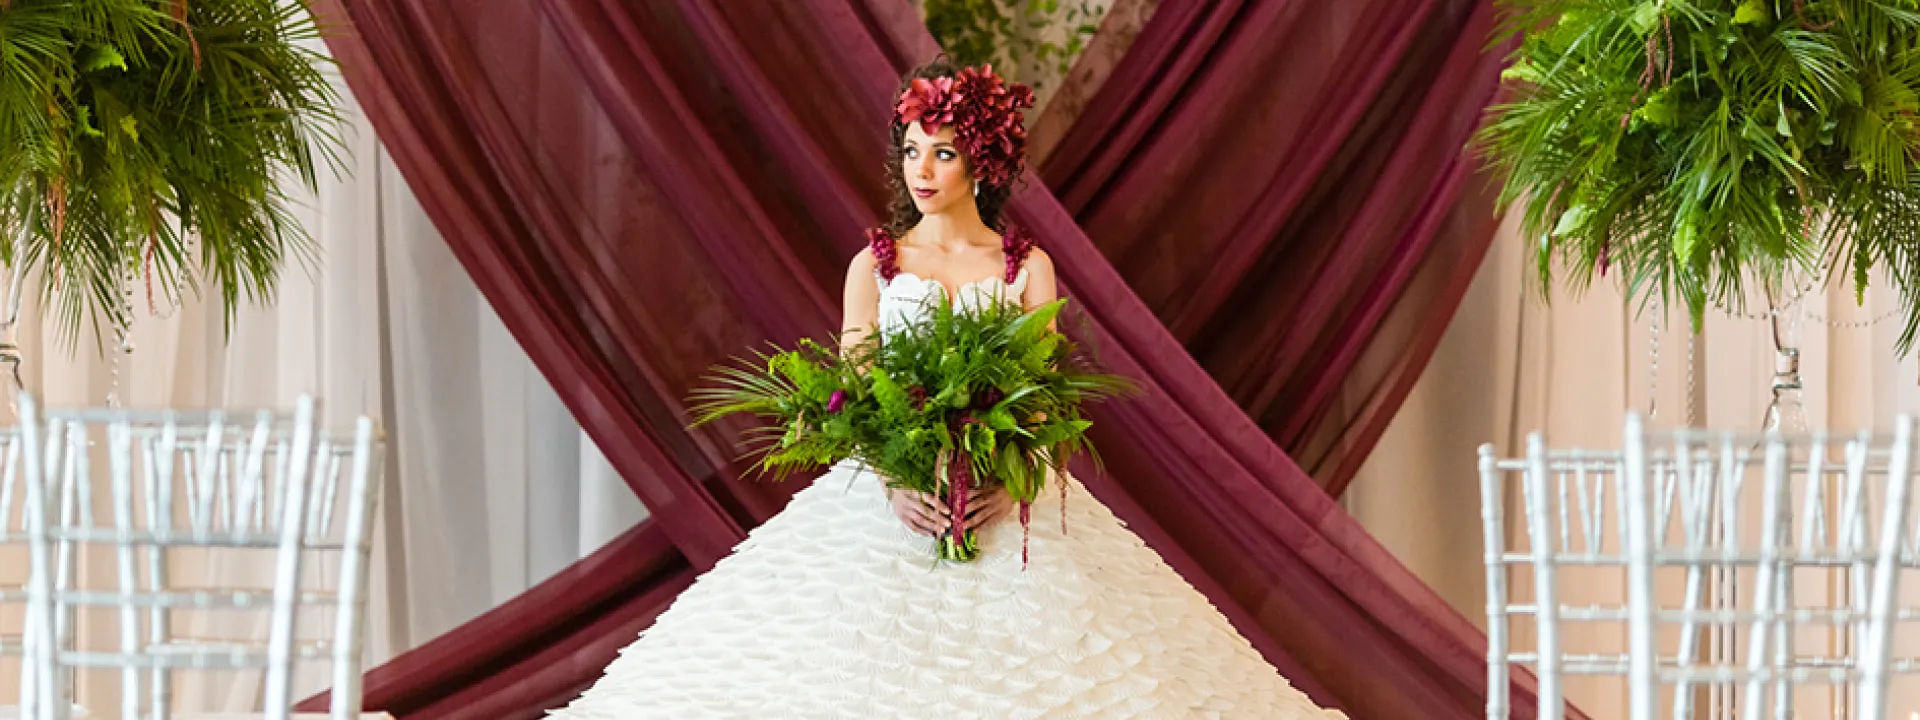 Holiday colors and a paper wedding dress